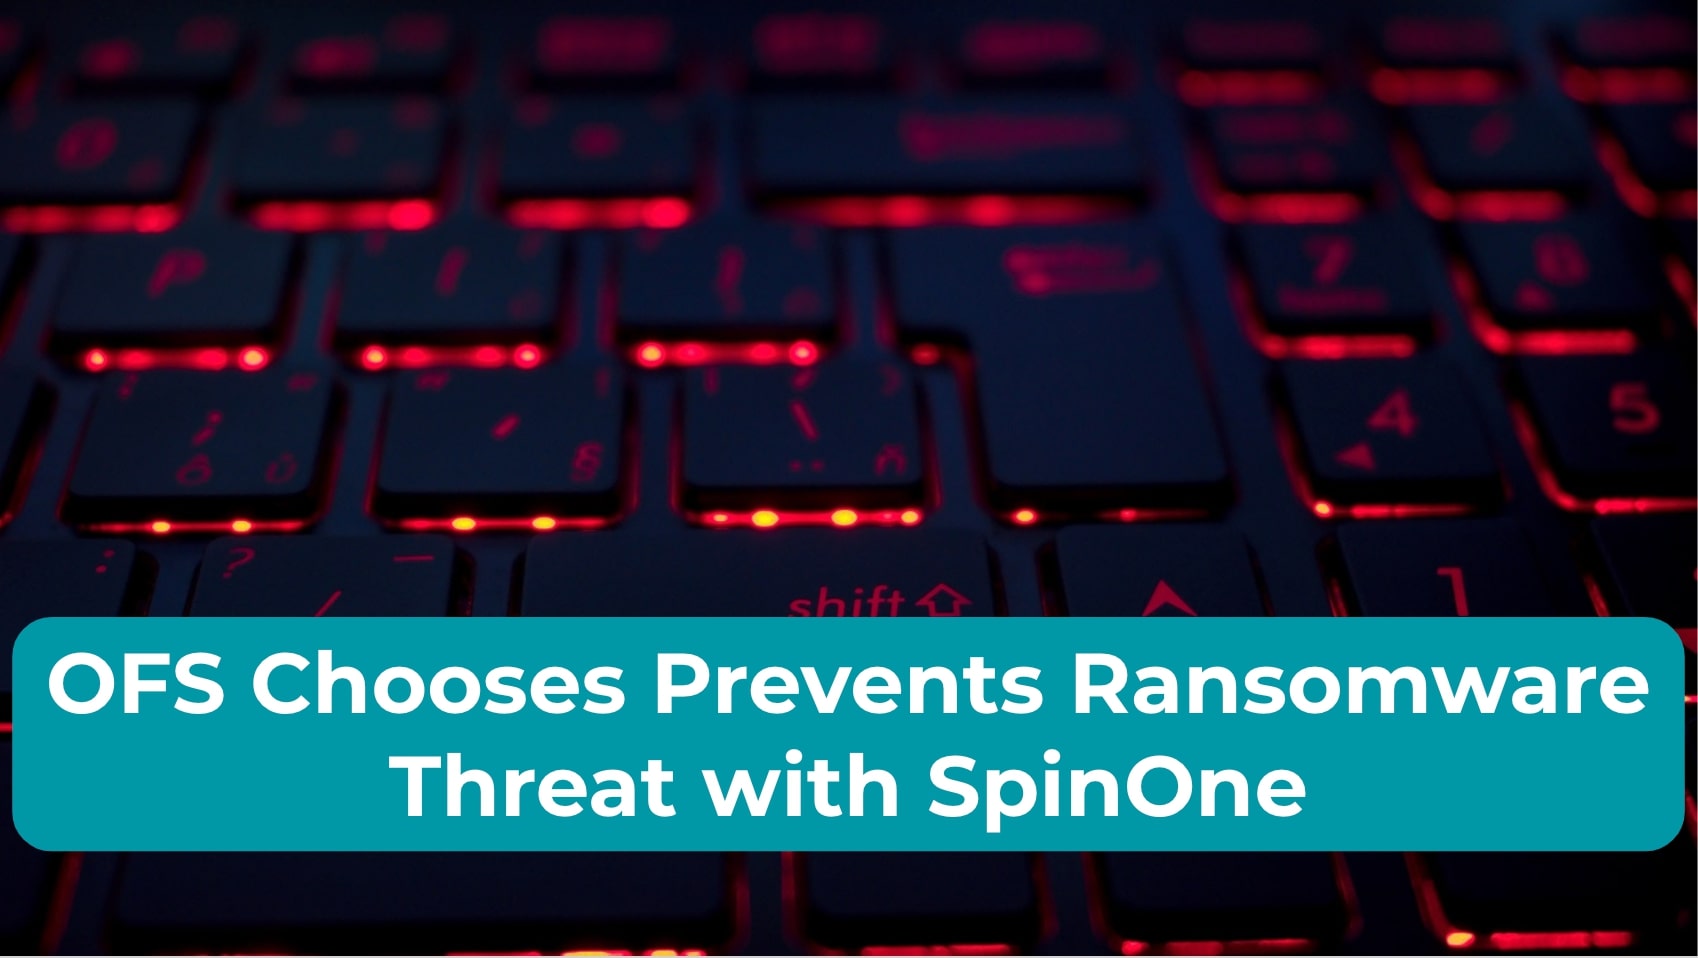 OFS Chooses Prevents Ransomware Threat with SpinOne